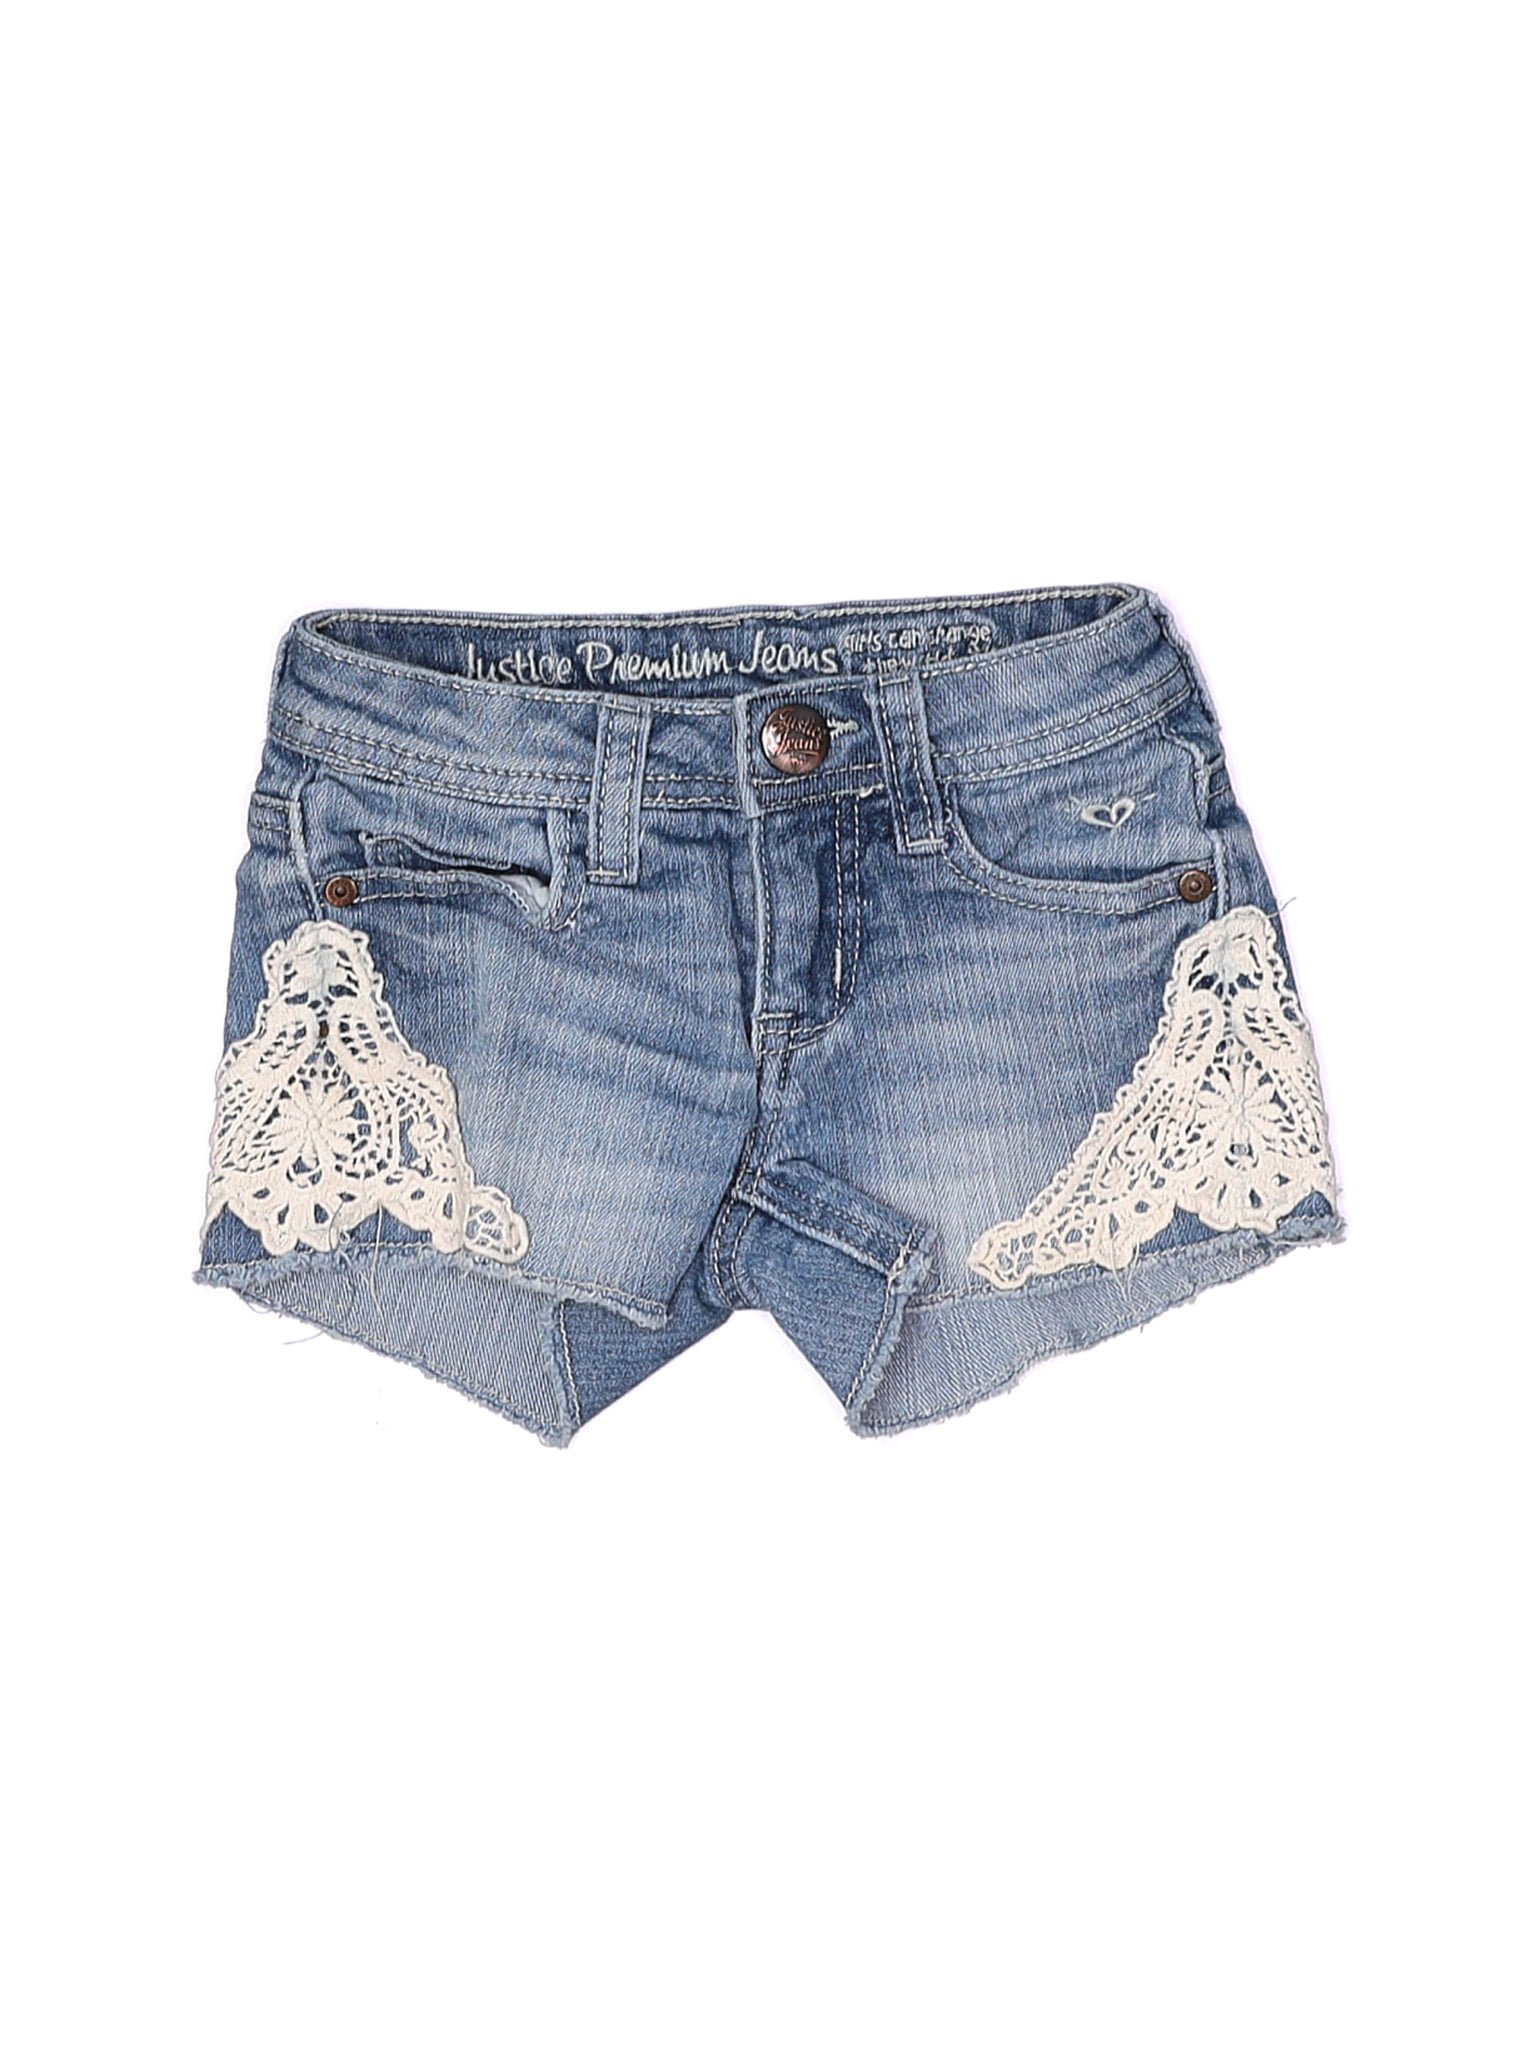 justice jean shorts